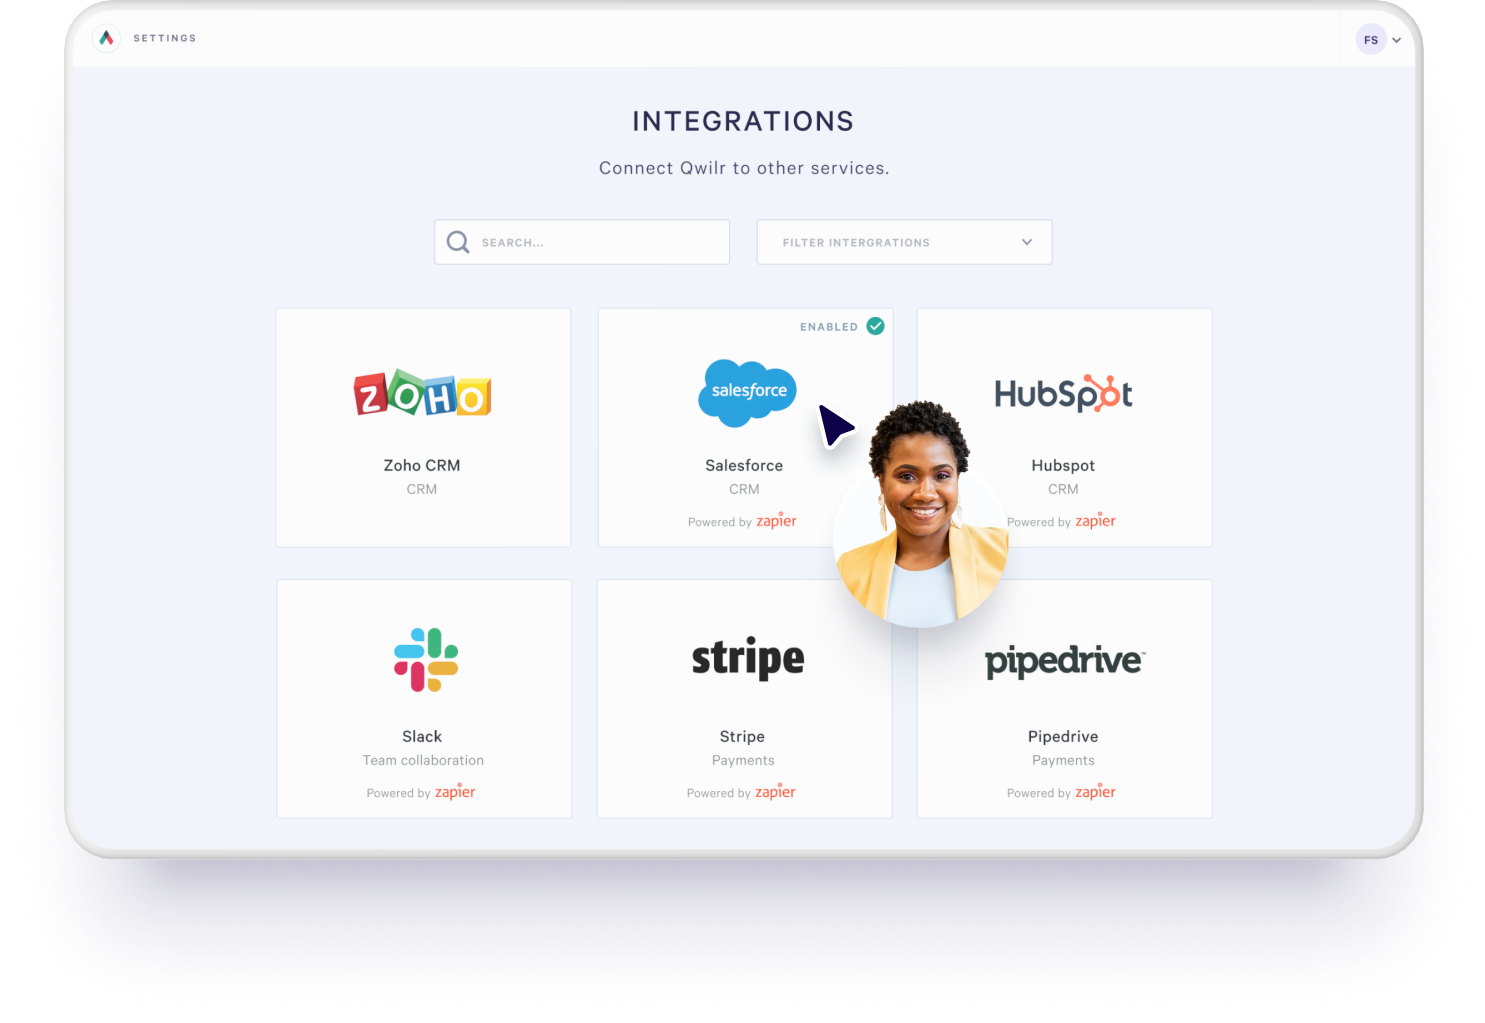 Connect Qwilr to Zoho, Salesforce, HubSpot, Pipedrive, Stripe, Slack and more